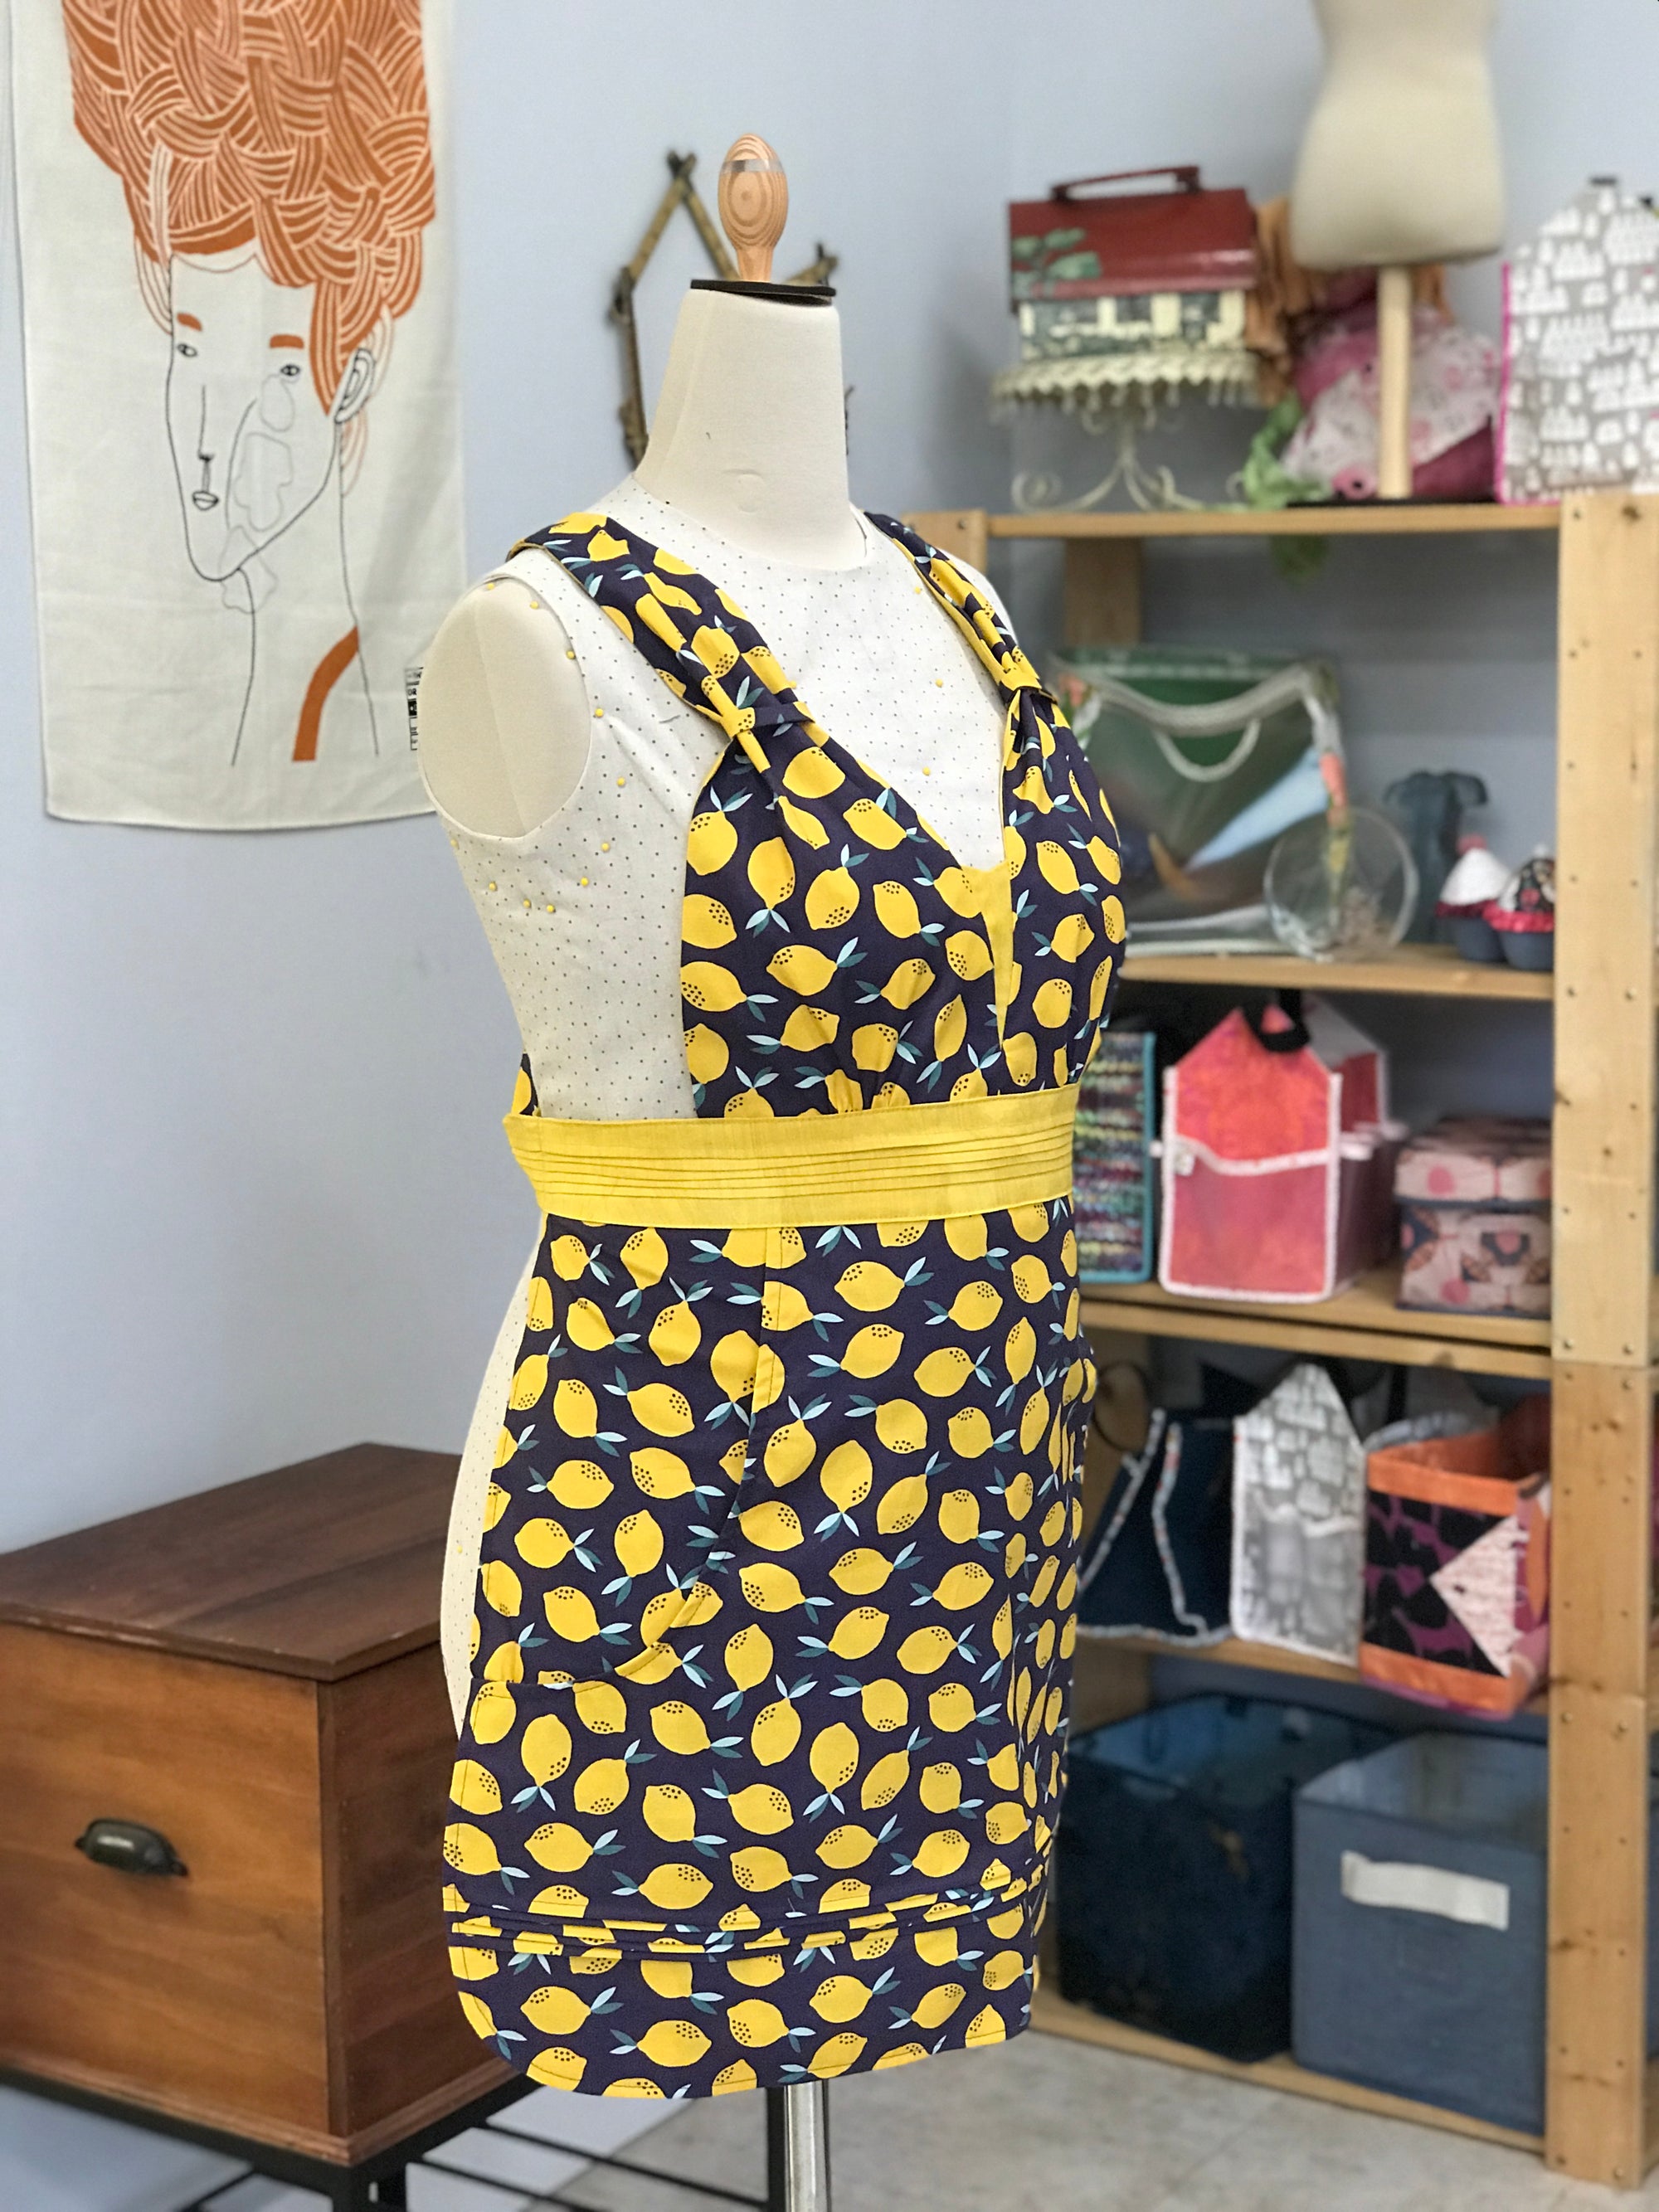 Gathering Apron by Sew Liberated - Sew Sew